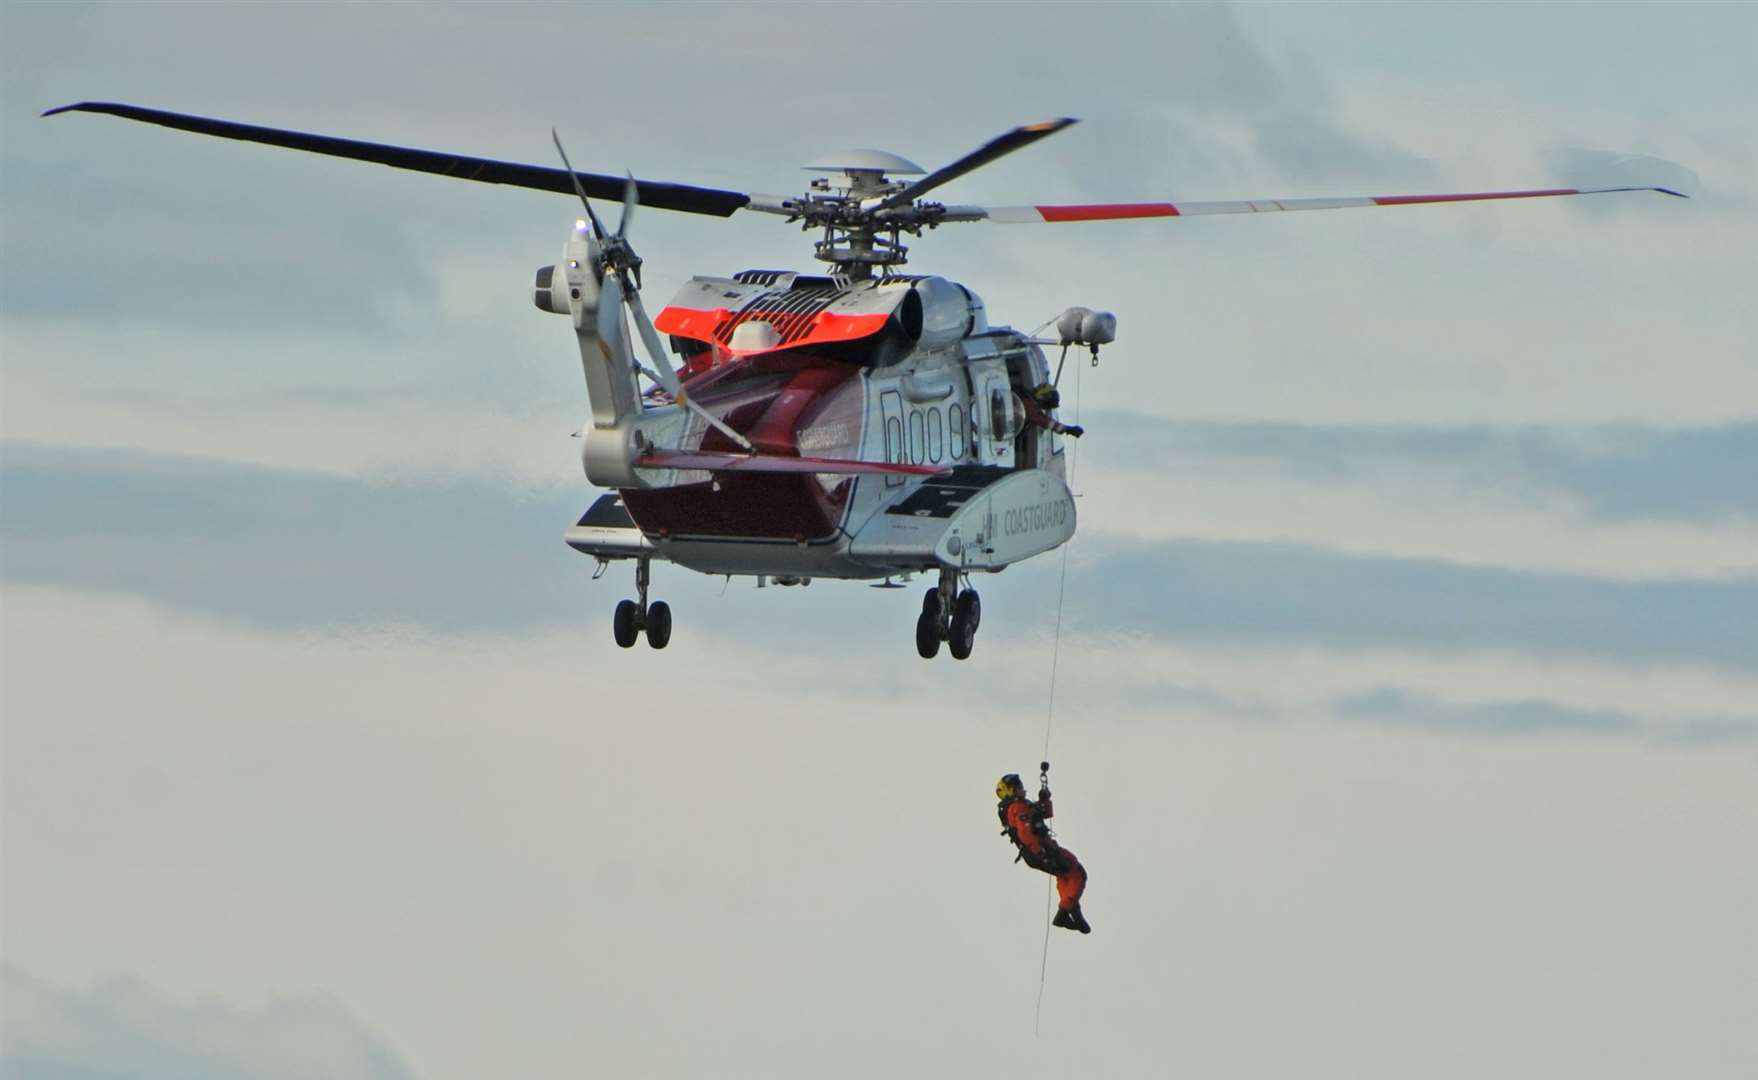 The coastguard helicopter was involved in the rescue (file photo).